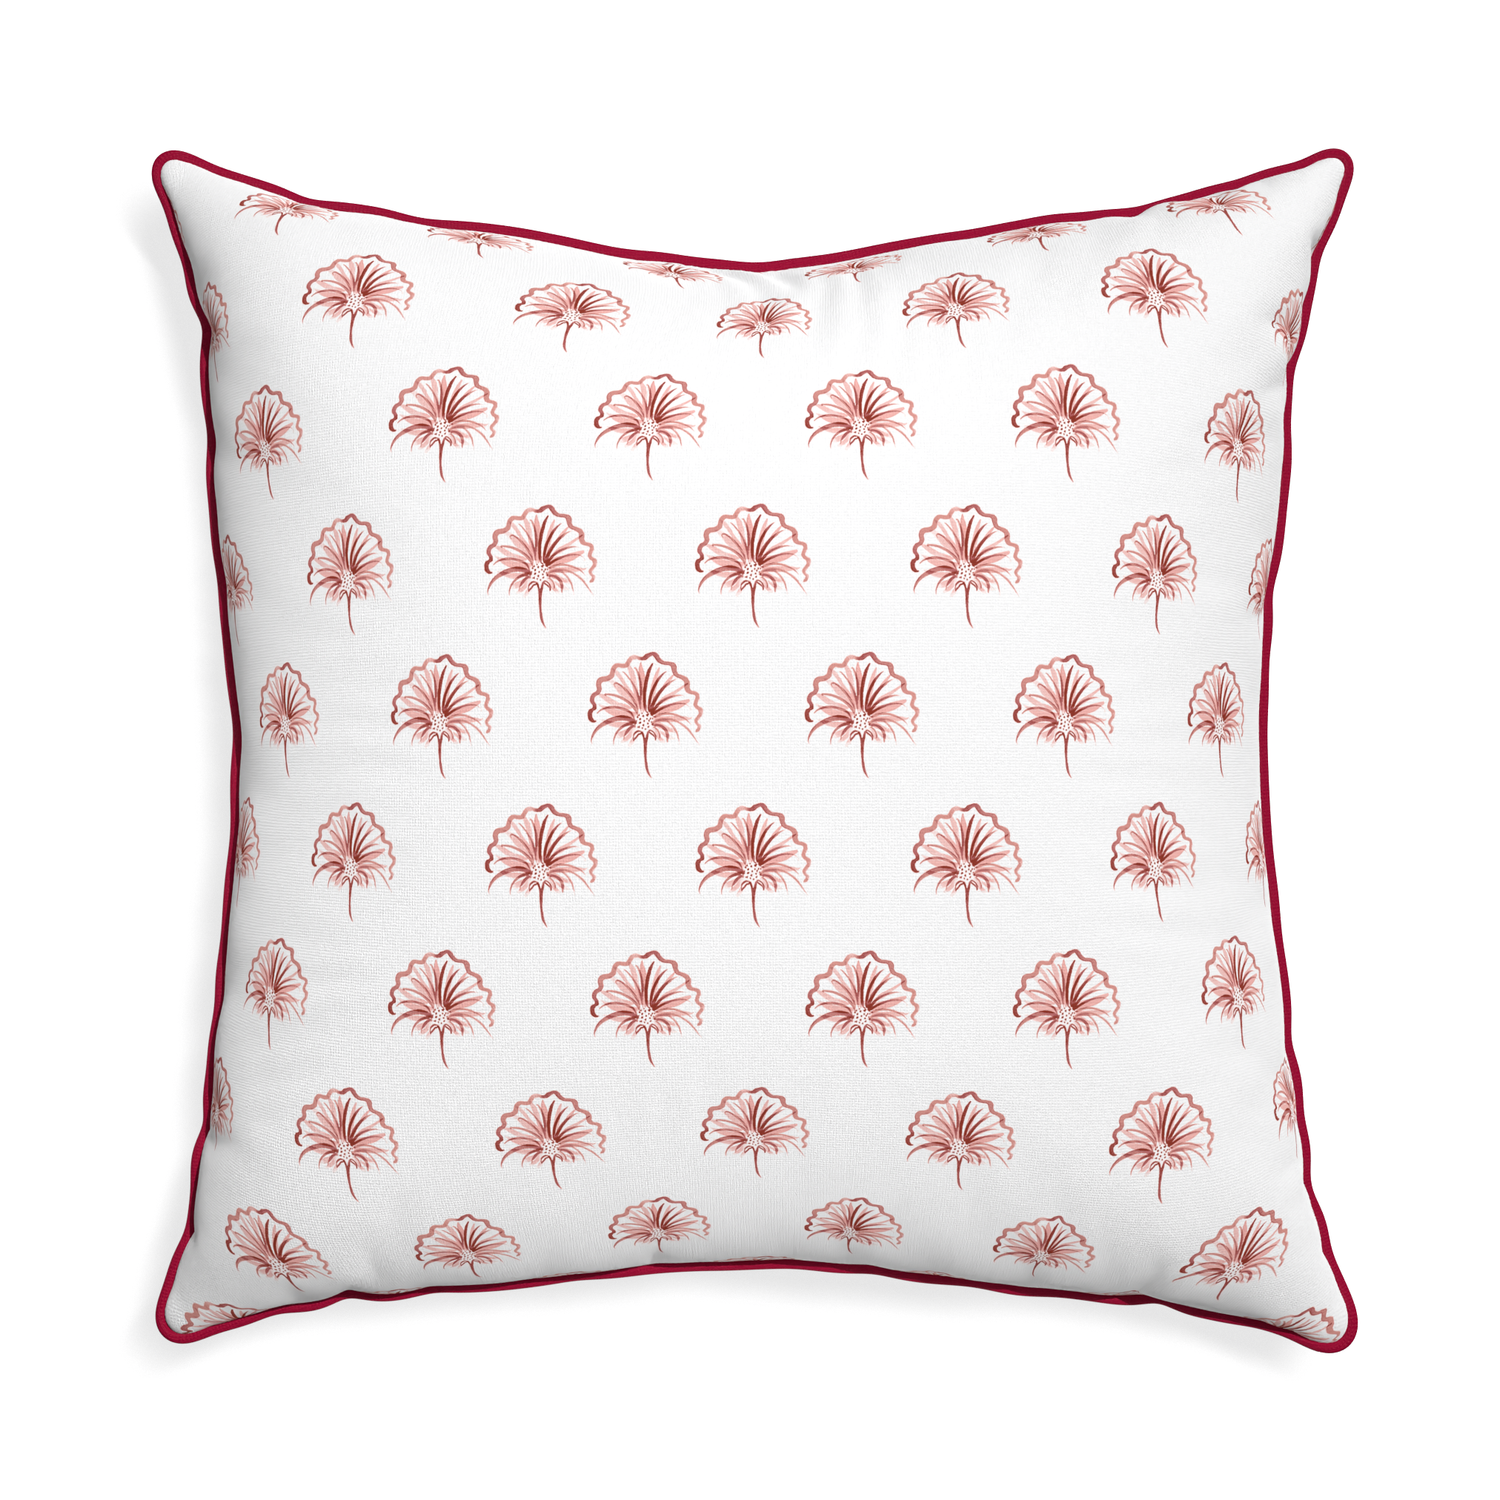 Euro-sham penelope rose custom floral pinkpillow with raspberry piping on white background